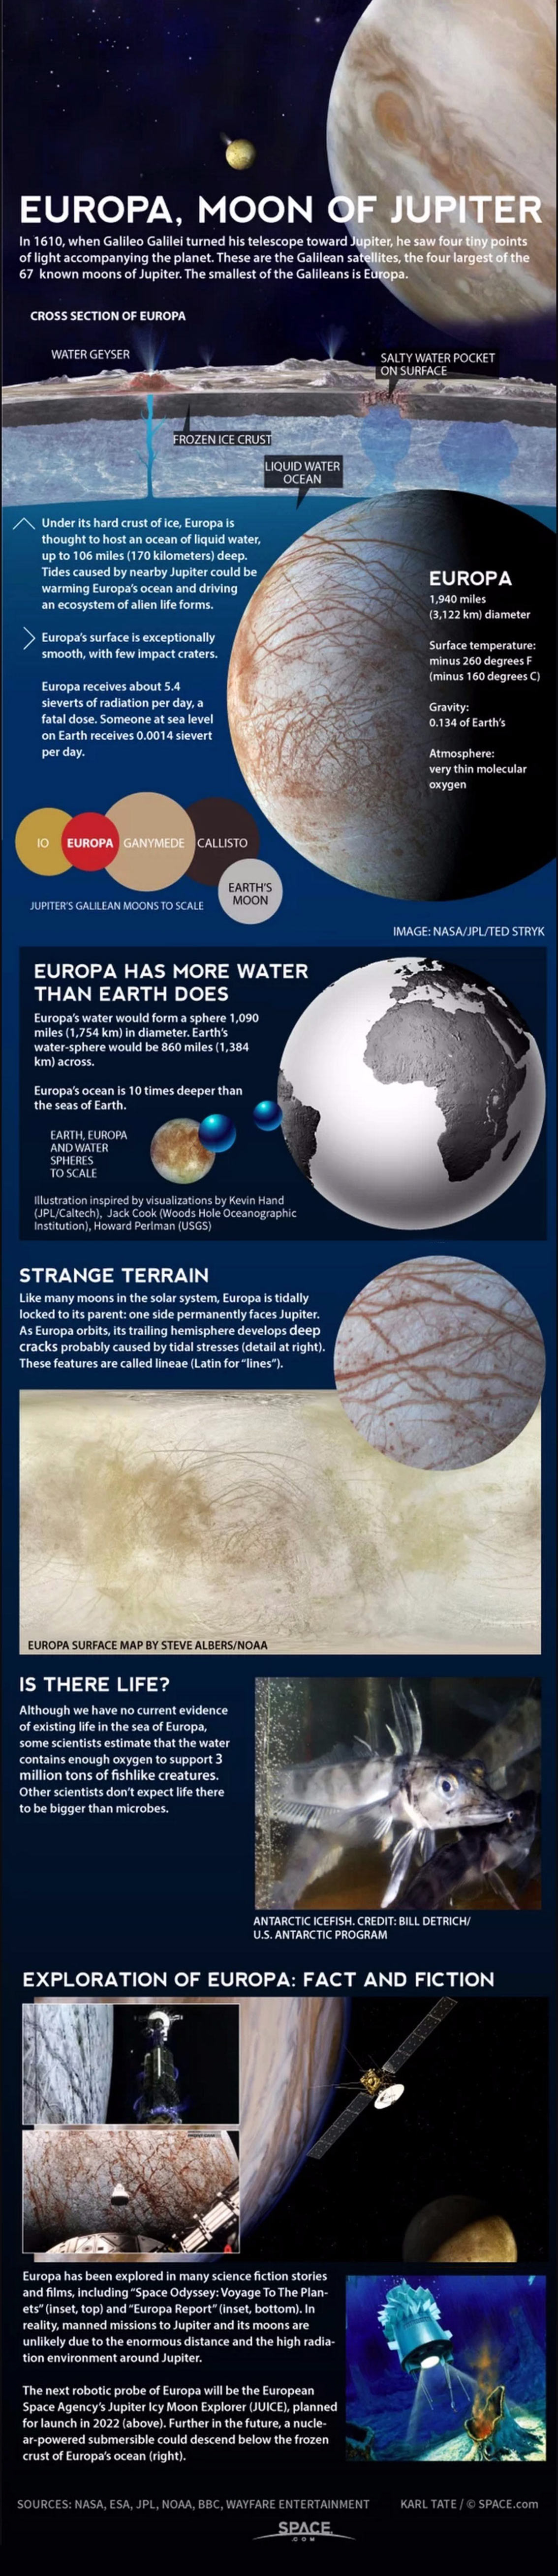 The Potential of Alien Life within Jupiter's Moon Europa - Astronomy Infographic